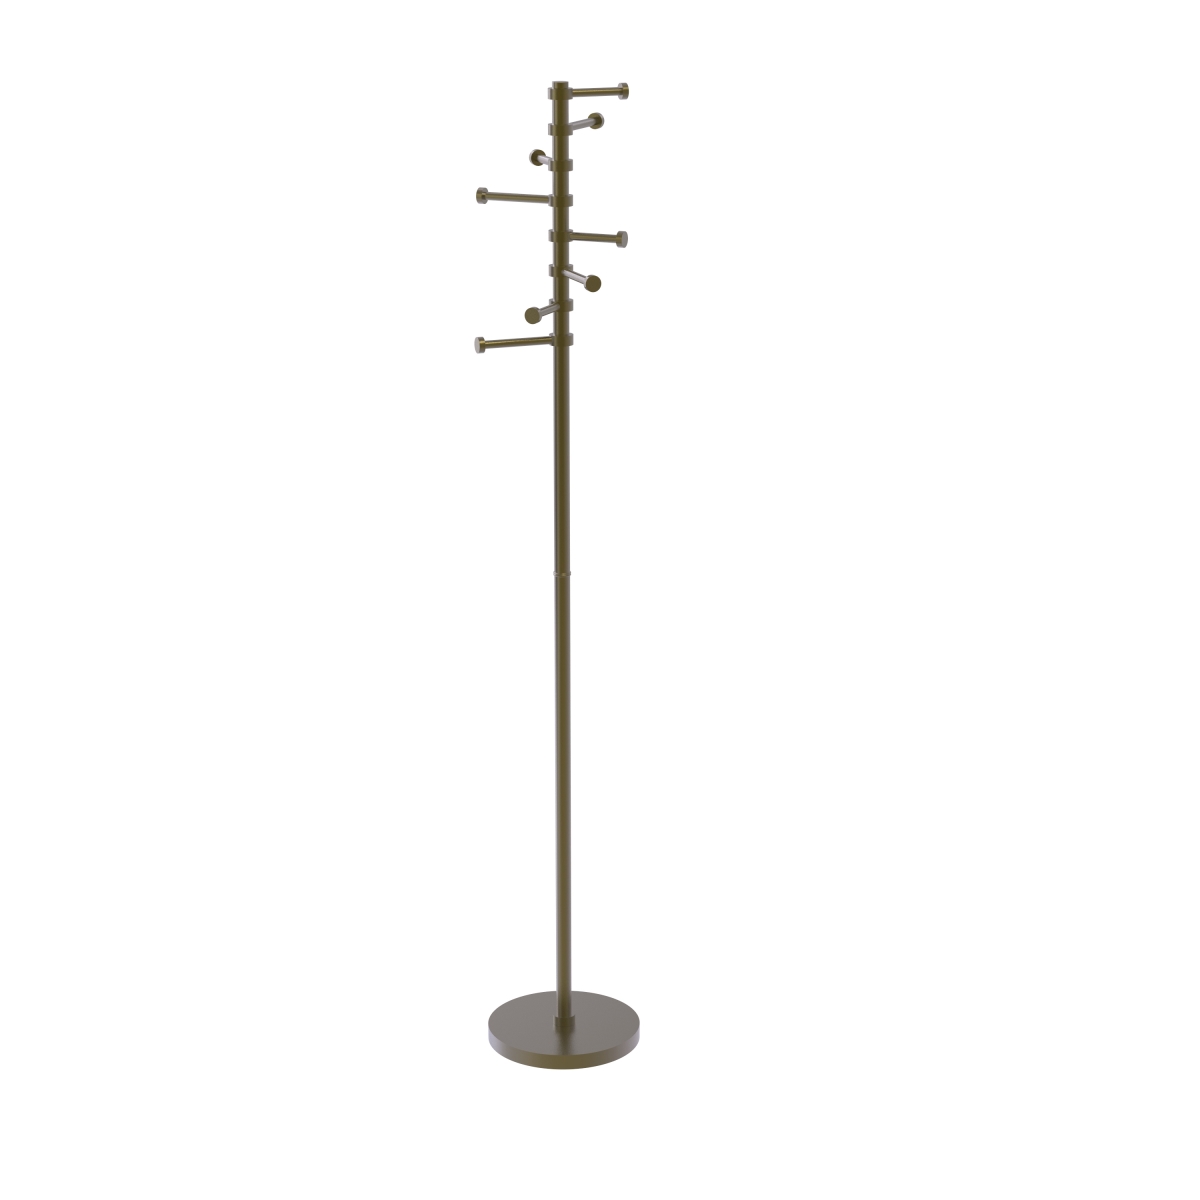 Picture of Allied Brass CS-1-ABR Free Standing Coat Rack with Six Pivoting Pegs, Antique Brass